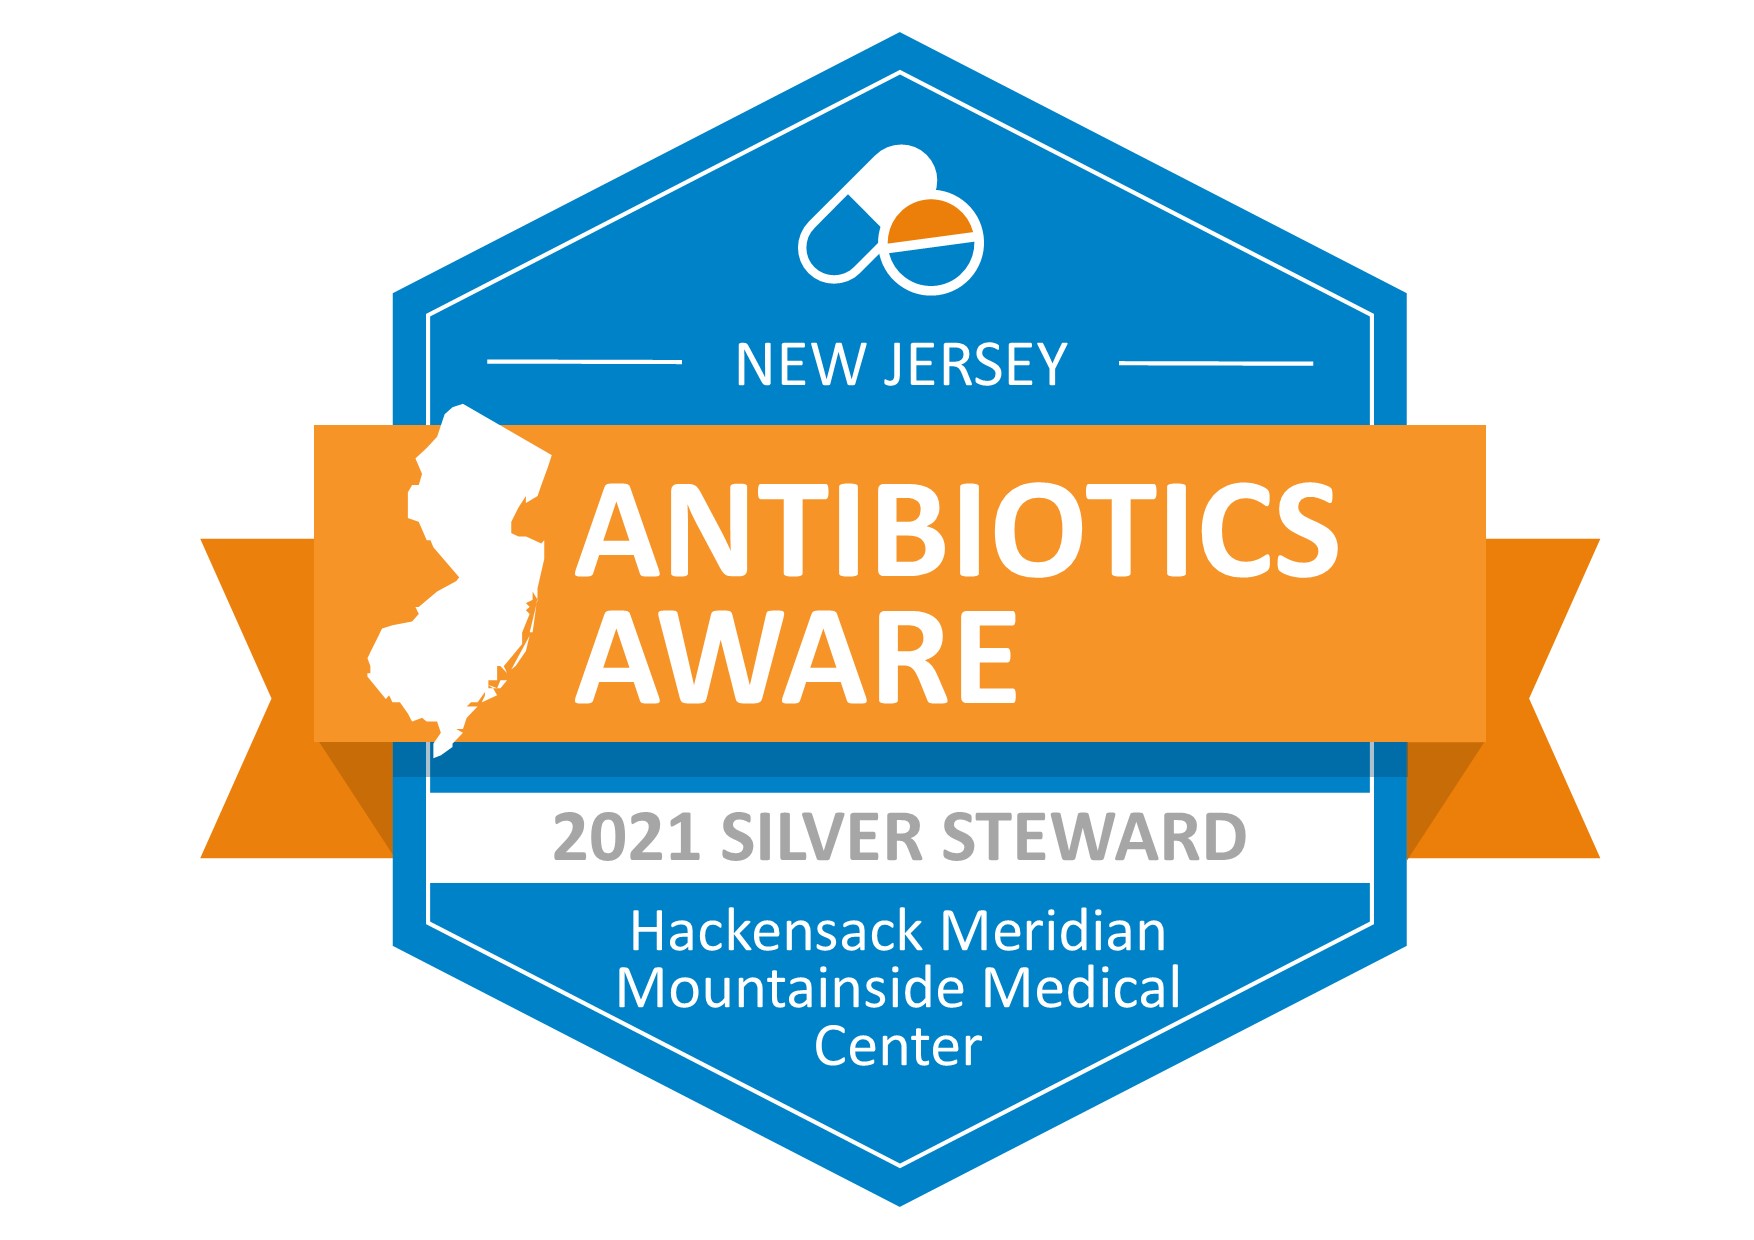 Hackensack Meridian Mountainside Medical Center Receives The New Jersey Department of Health 2021 Silver Antimicrobial Steward Award